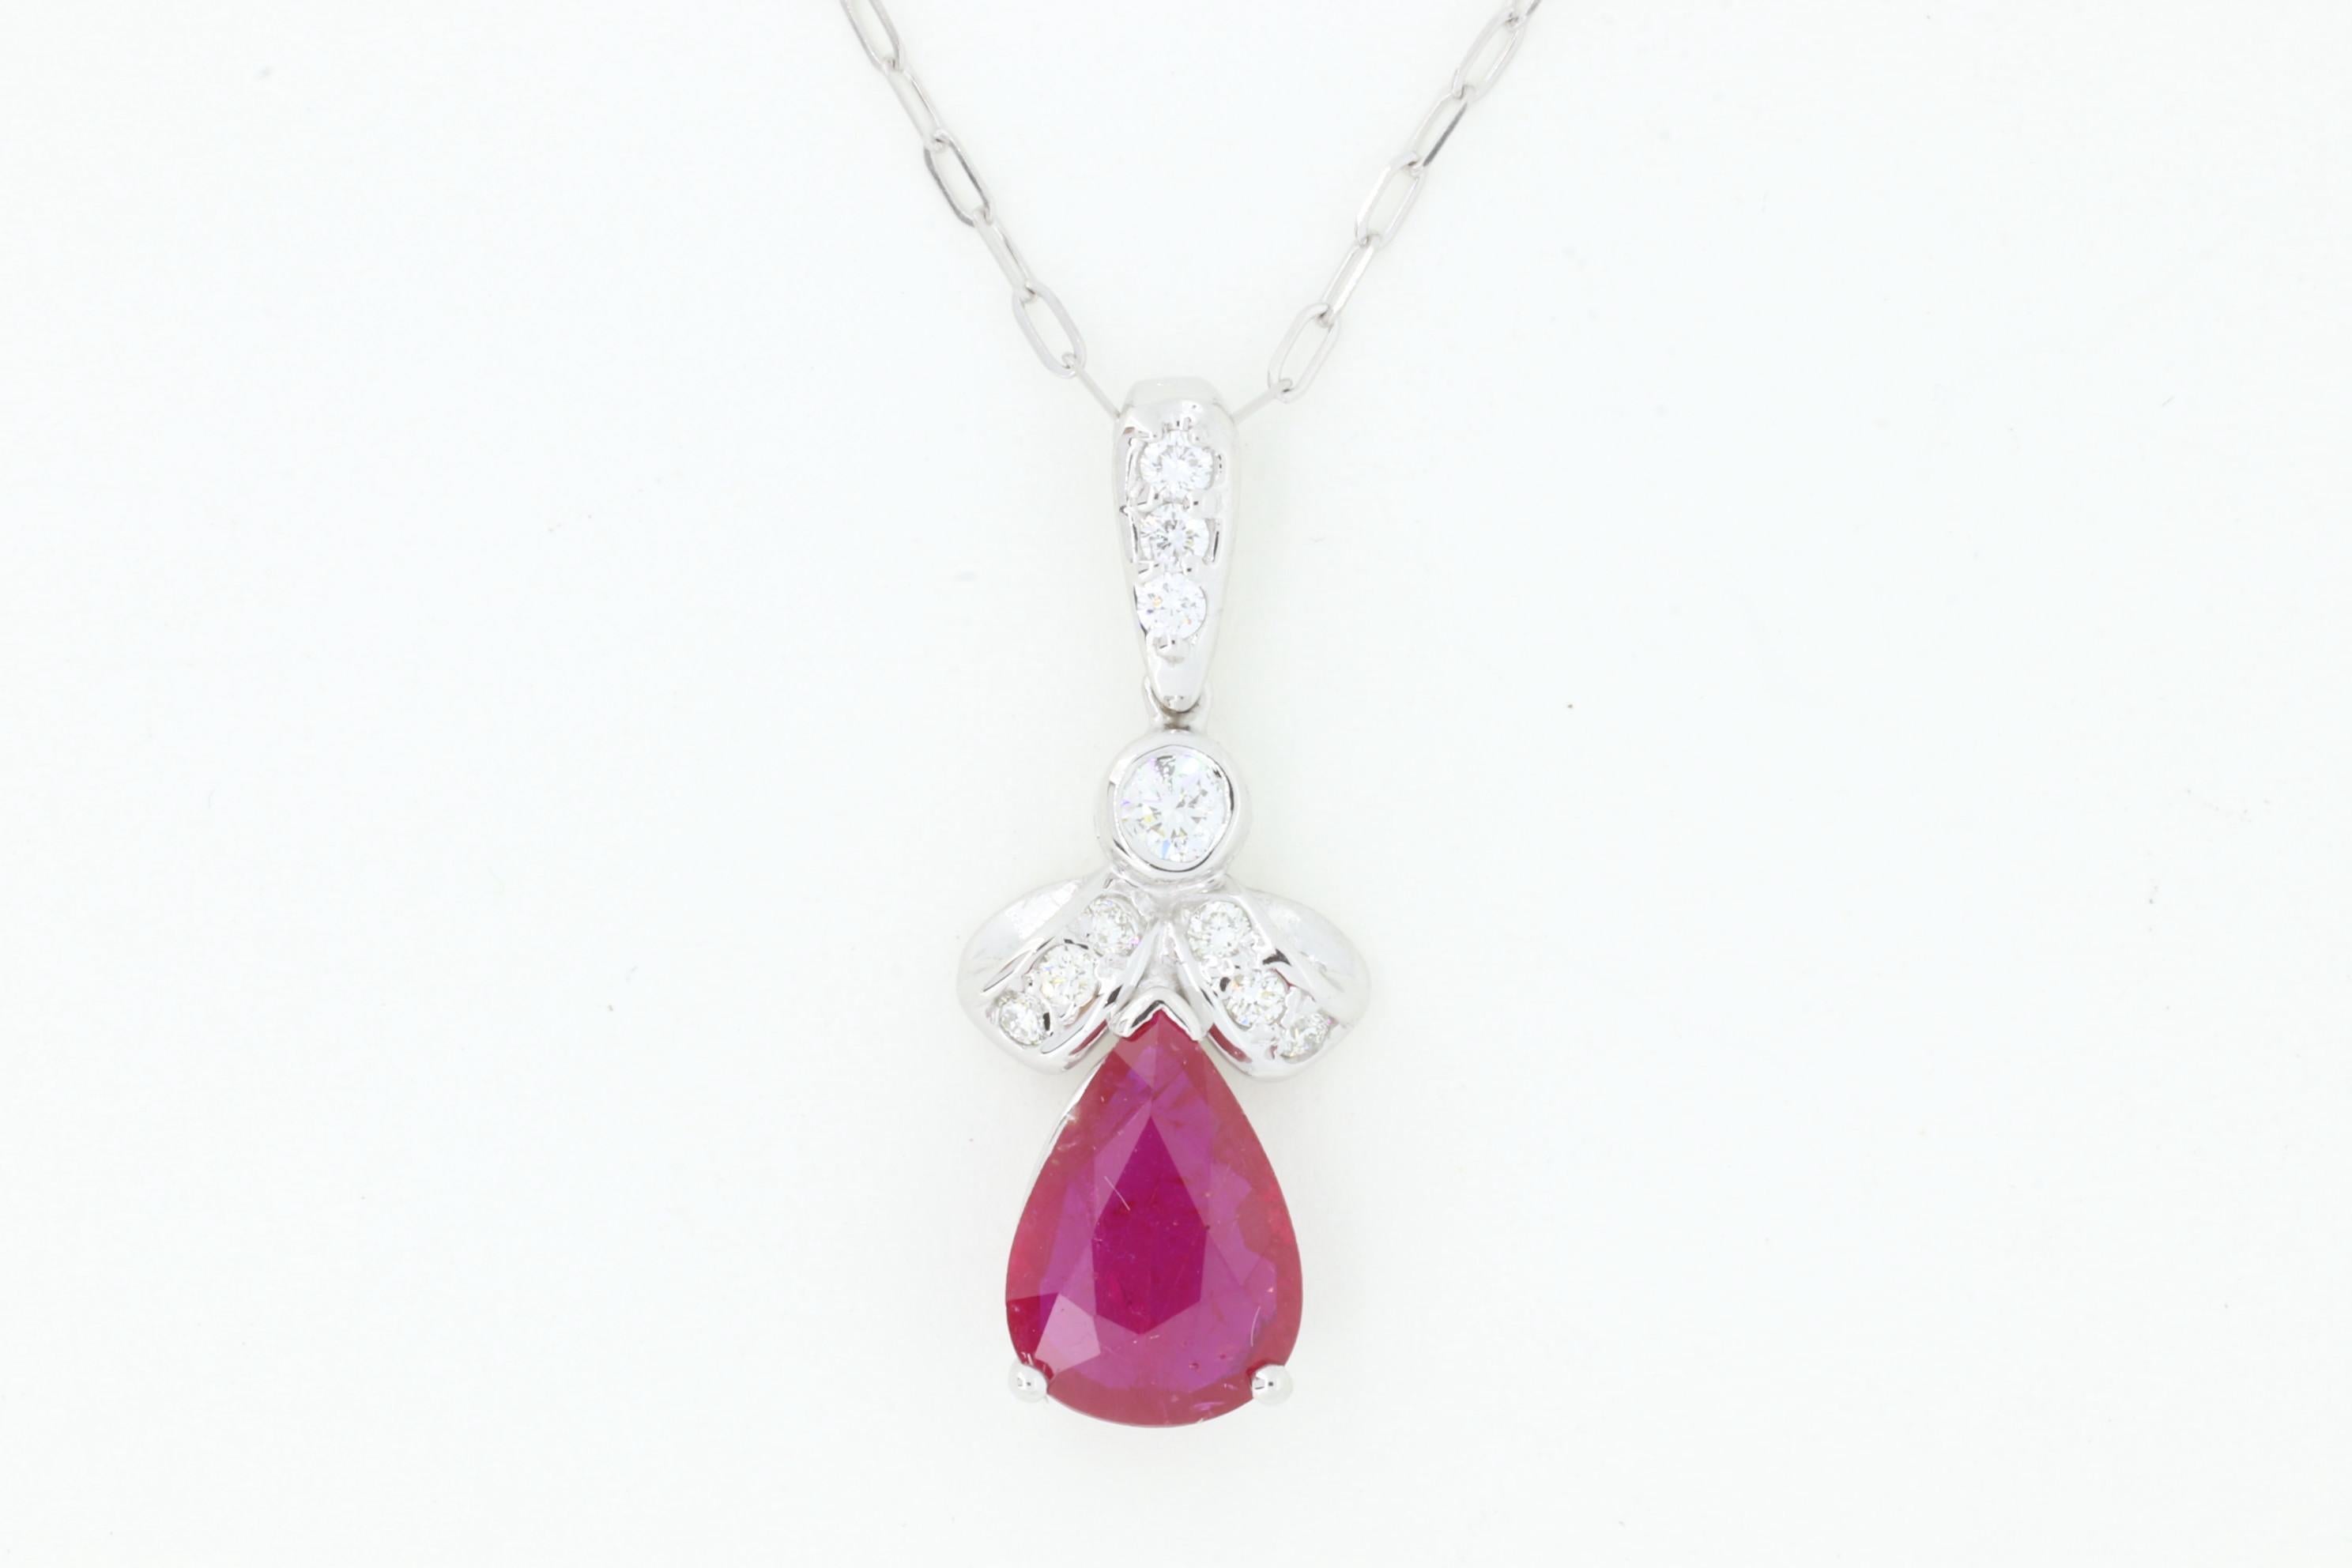 14K White Gold

1 Pear Shape Ruby at approximately 1.60 Carats Total Weight - Measures 9 x 7 millimeters

0.24 Carats Total Weight of Round Brilliant White Diamonds

Color: H-I / Clarity: SI 

Fine one-of-a-kind craftsmanship meets incredible